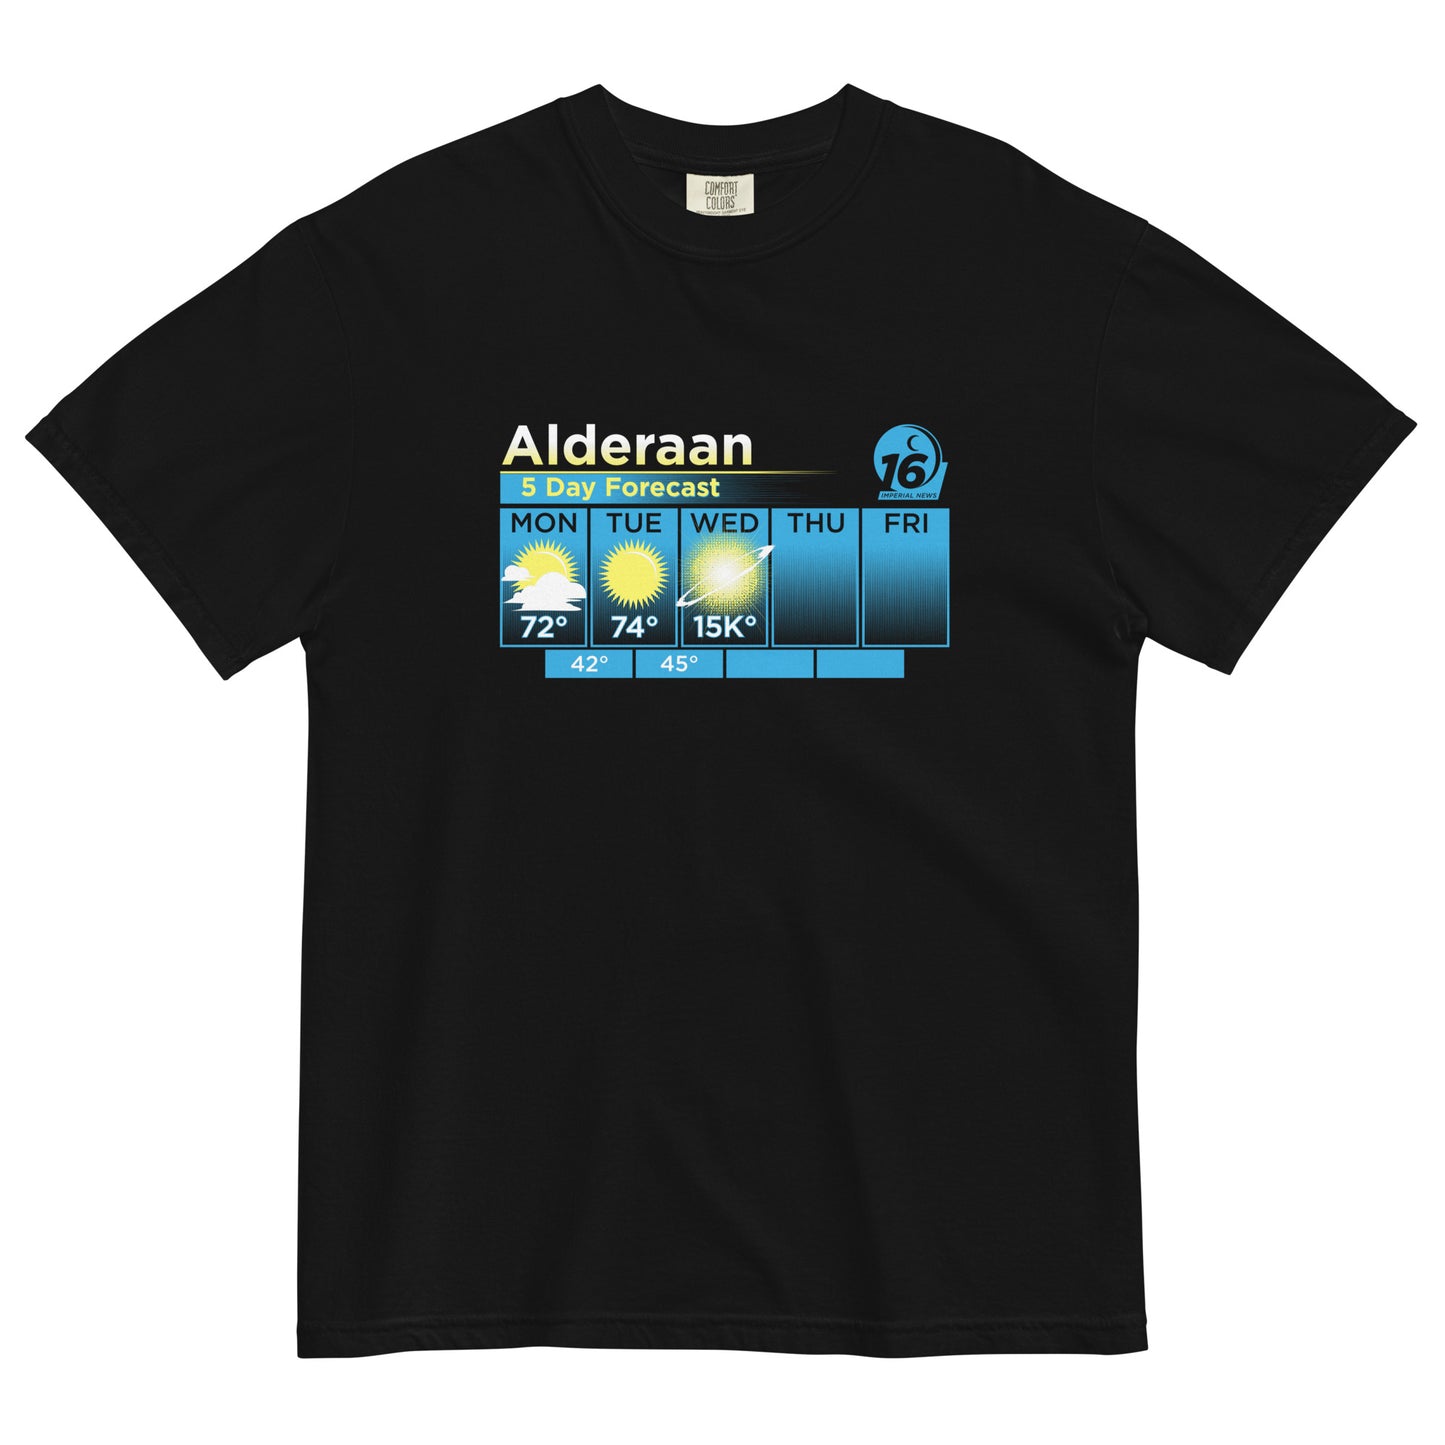 Alderaan 5 Day Forecast Men's Relaxed Fit Tee